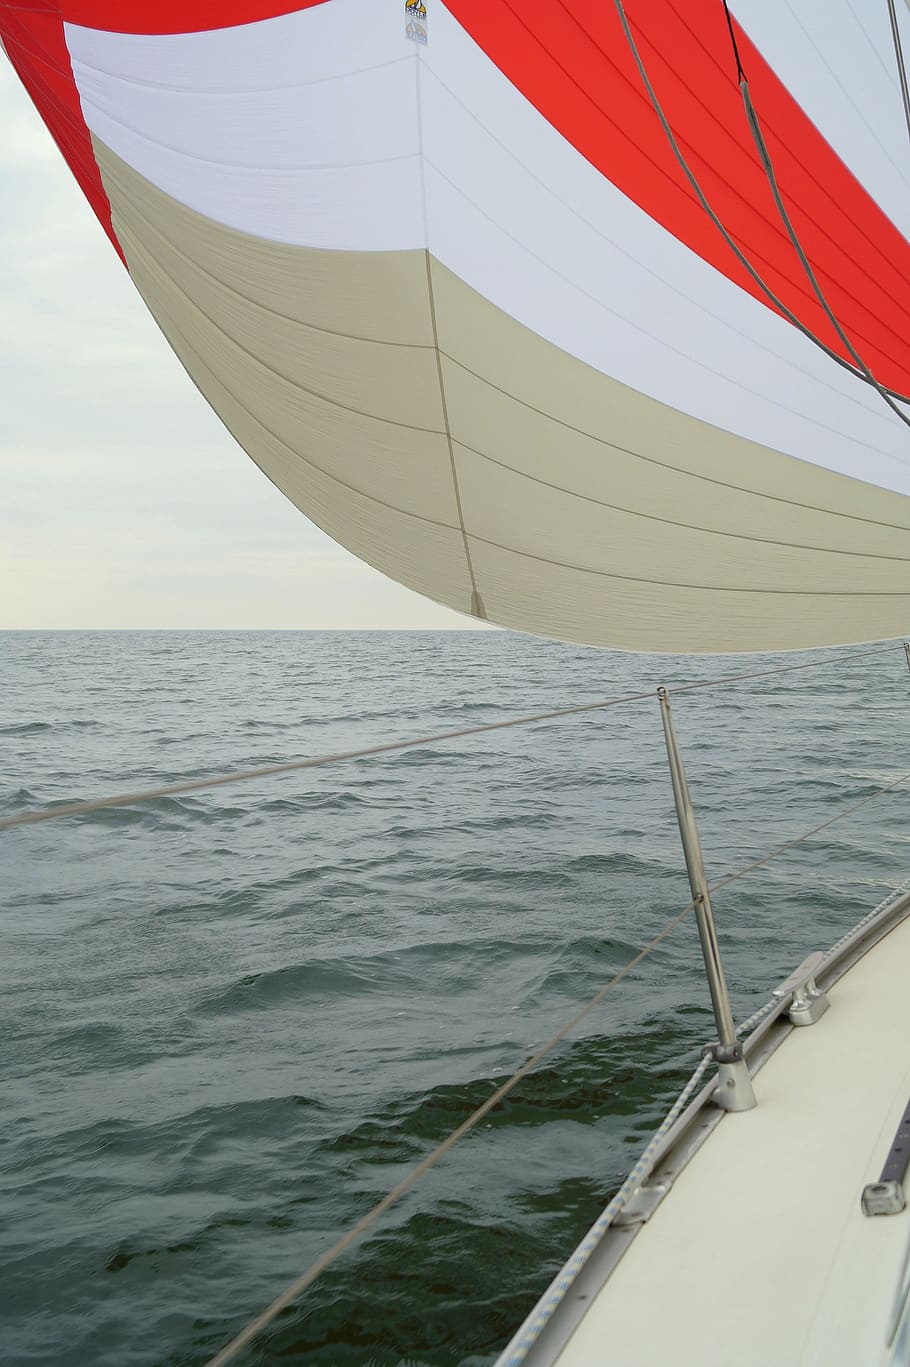 sail, blister, spinnaker, wind, speed, sailing boat, water, sport, leisure, yacht